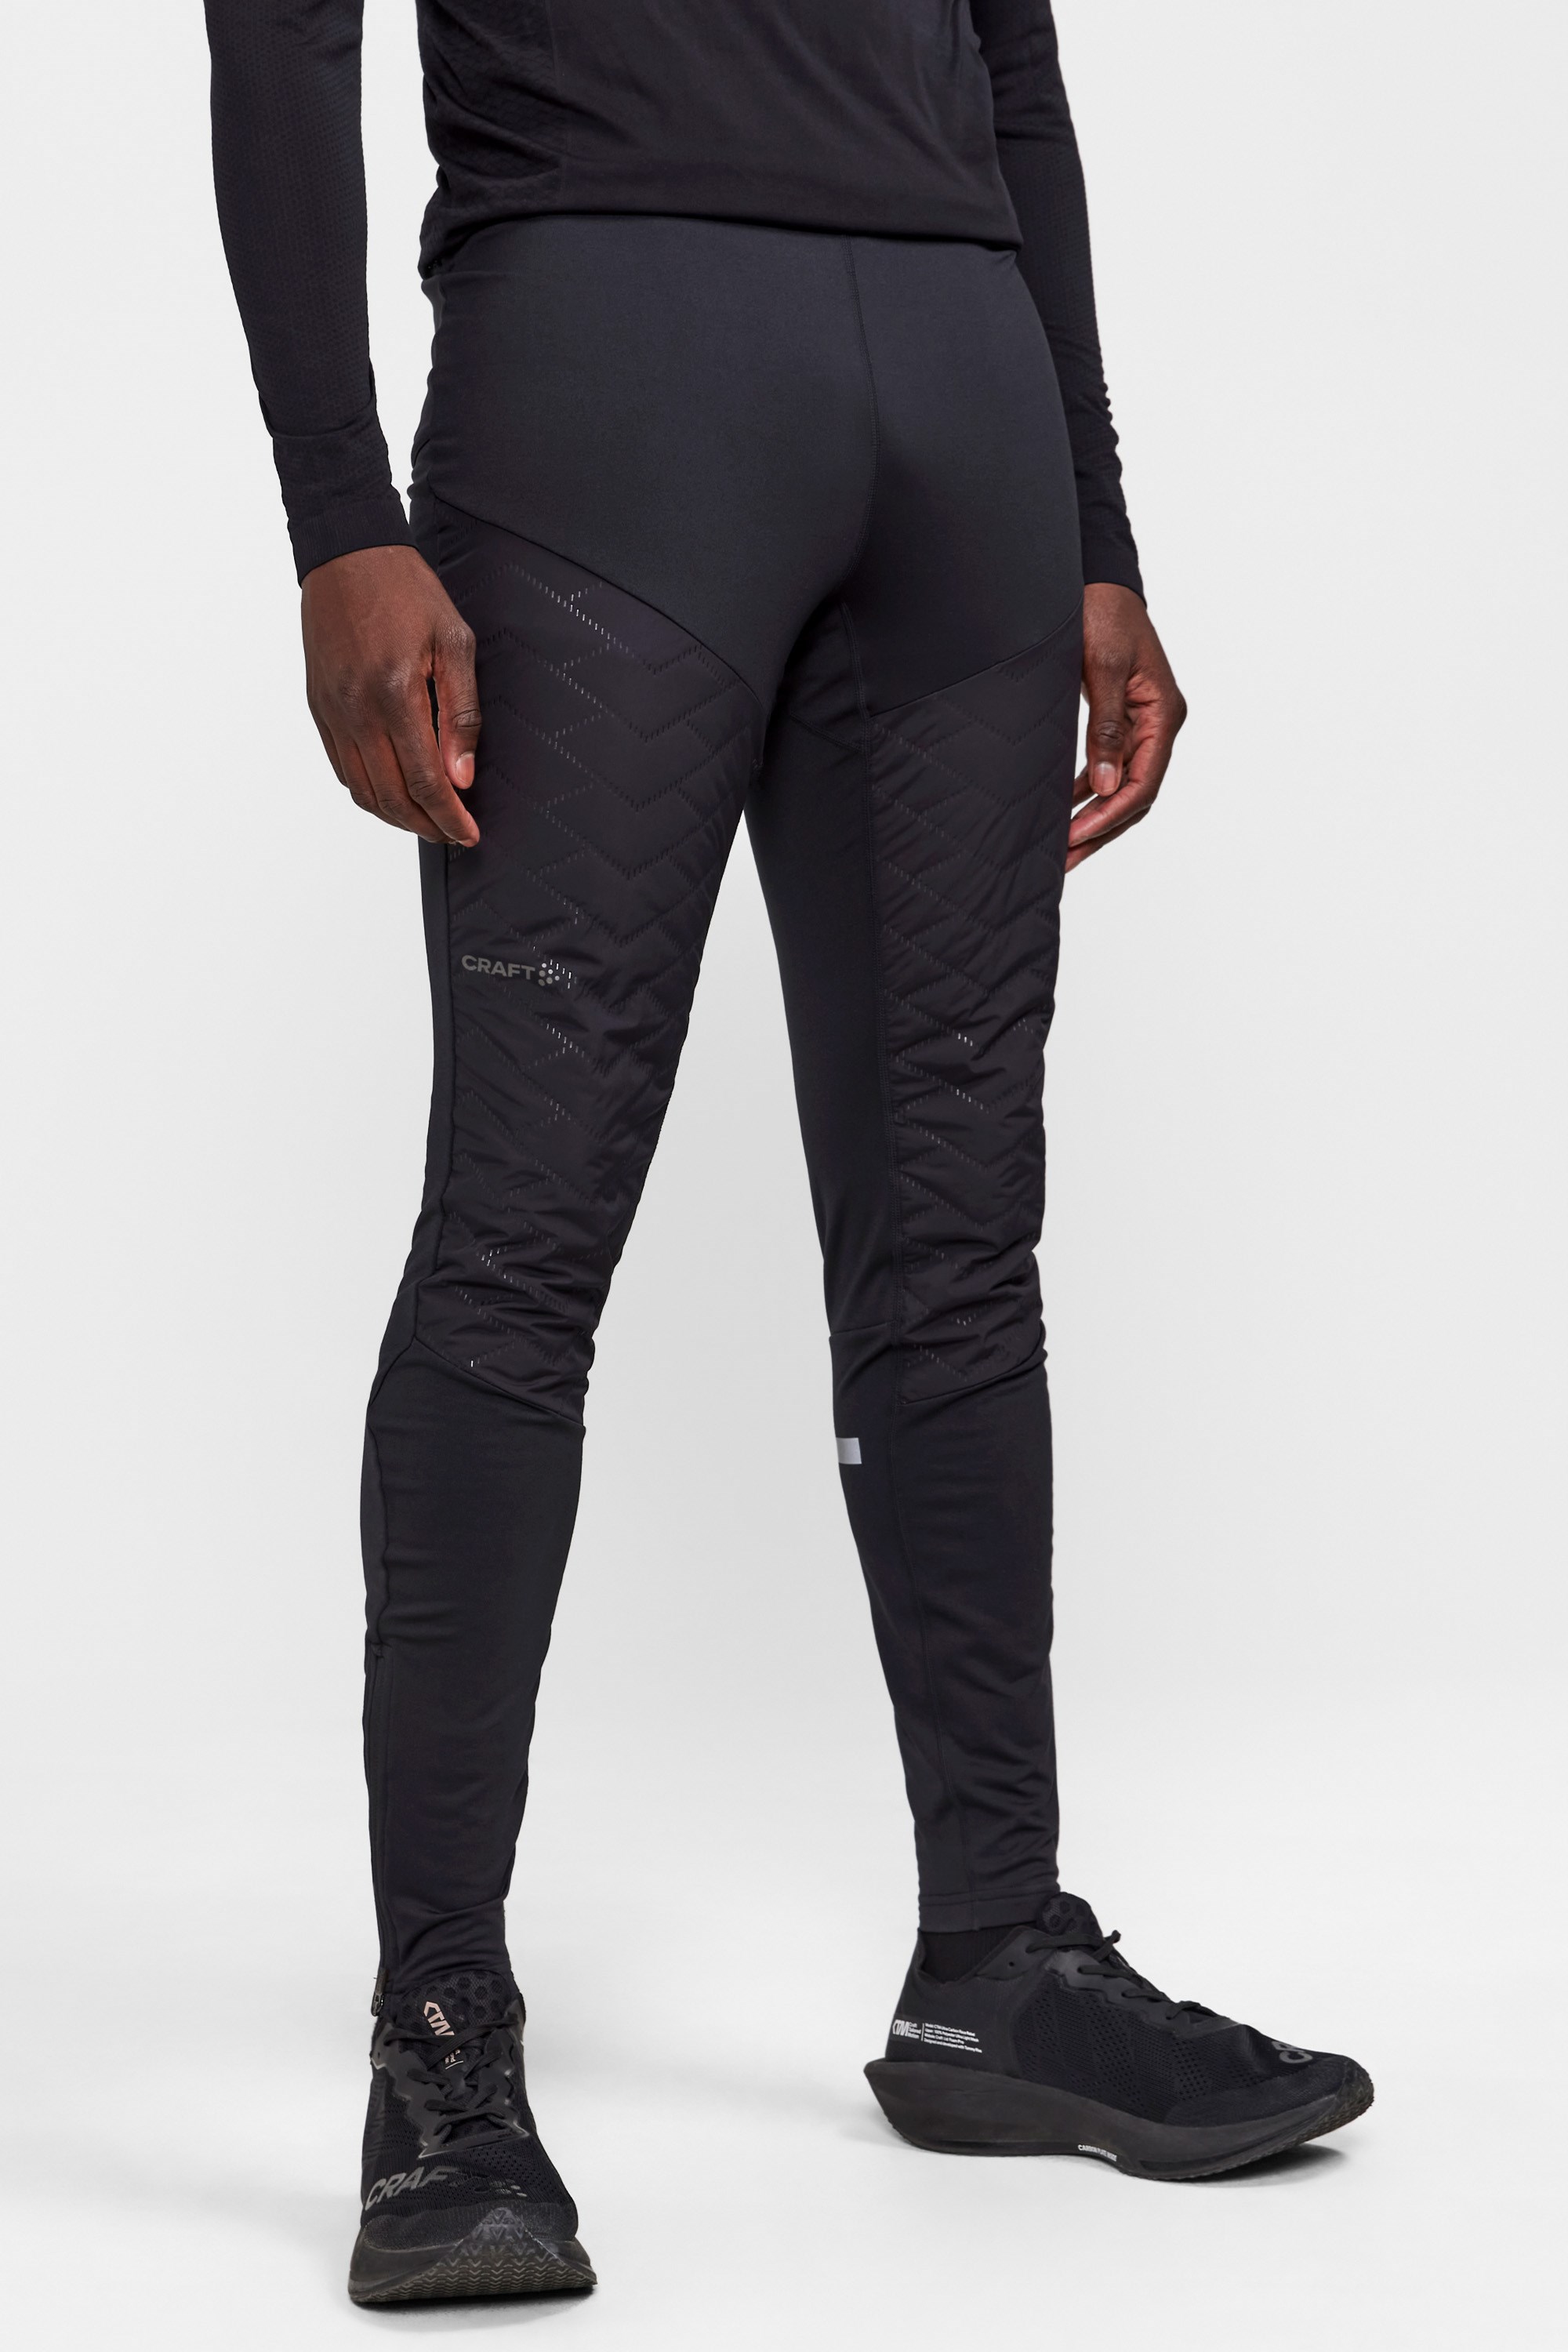 CTM Distance Mens Running Tights -, £30.00